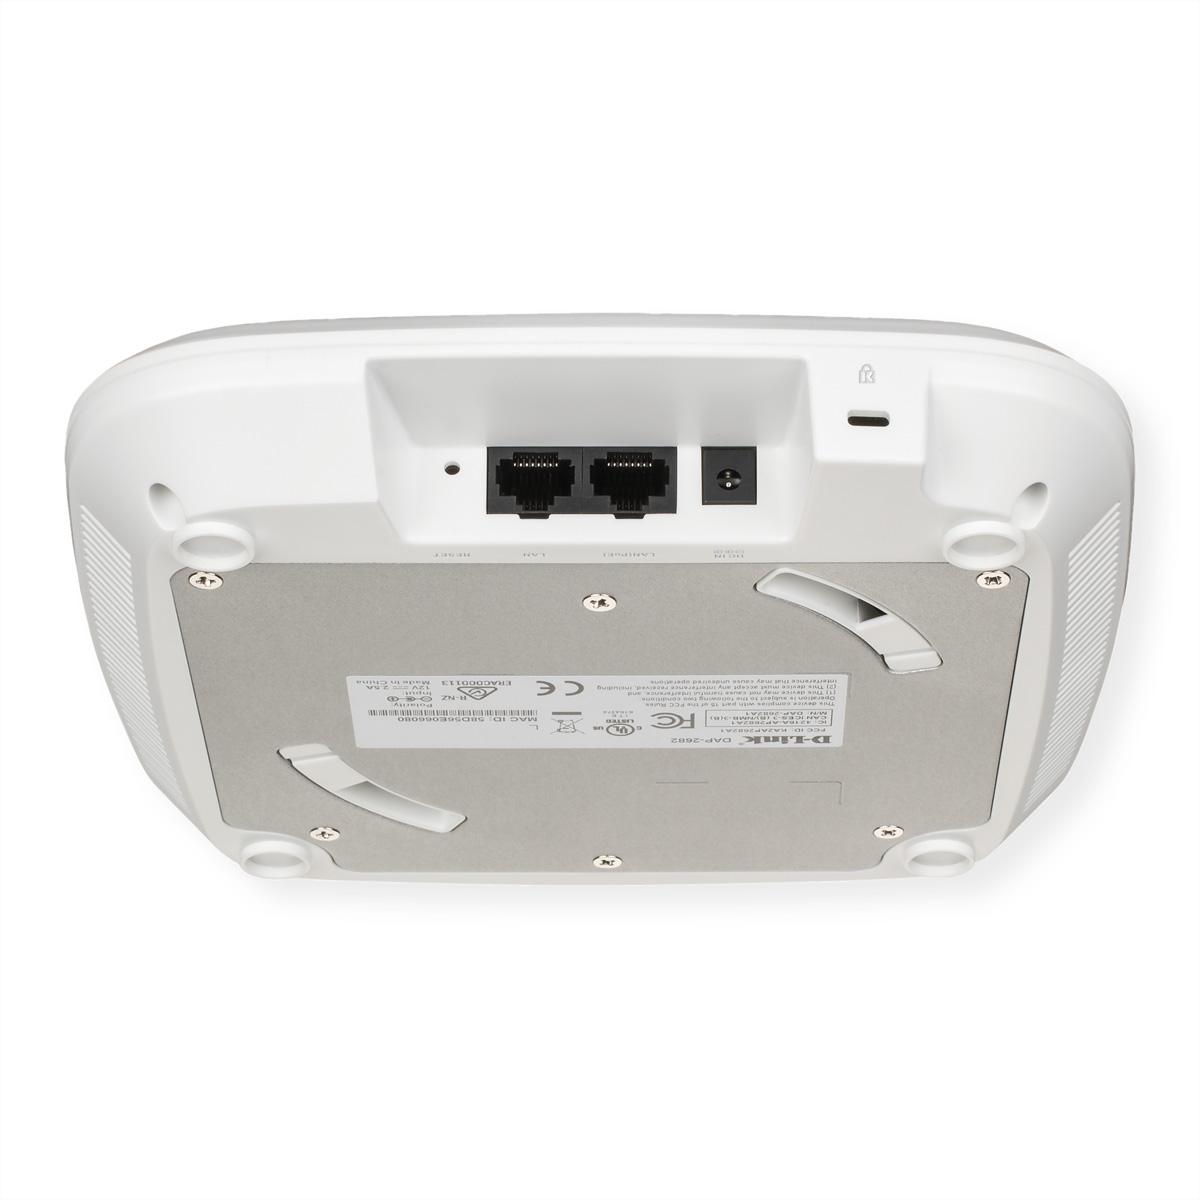 2 Access Access Gbit/s Dual-Band Point D-LINK 2,3 DAP-2682 AC2300 Wireless PoE Points Wave